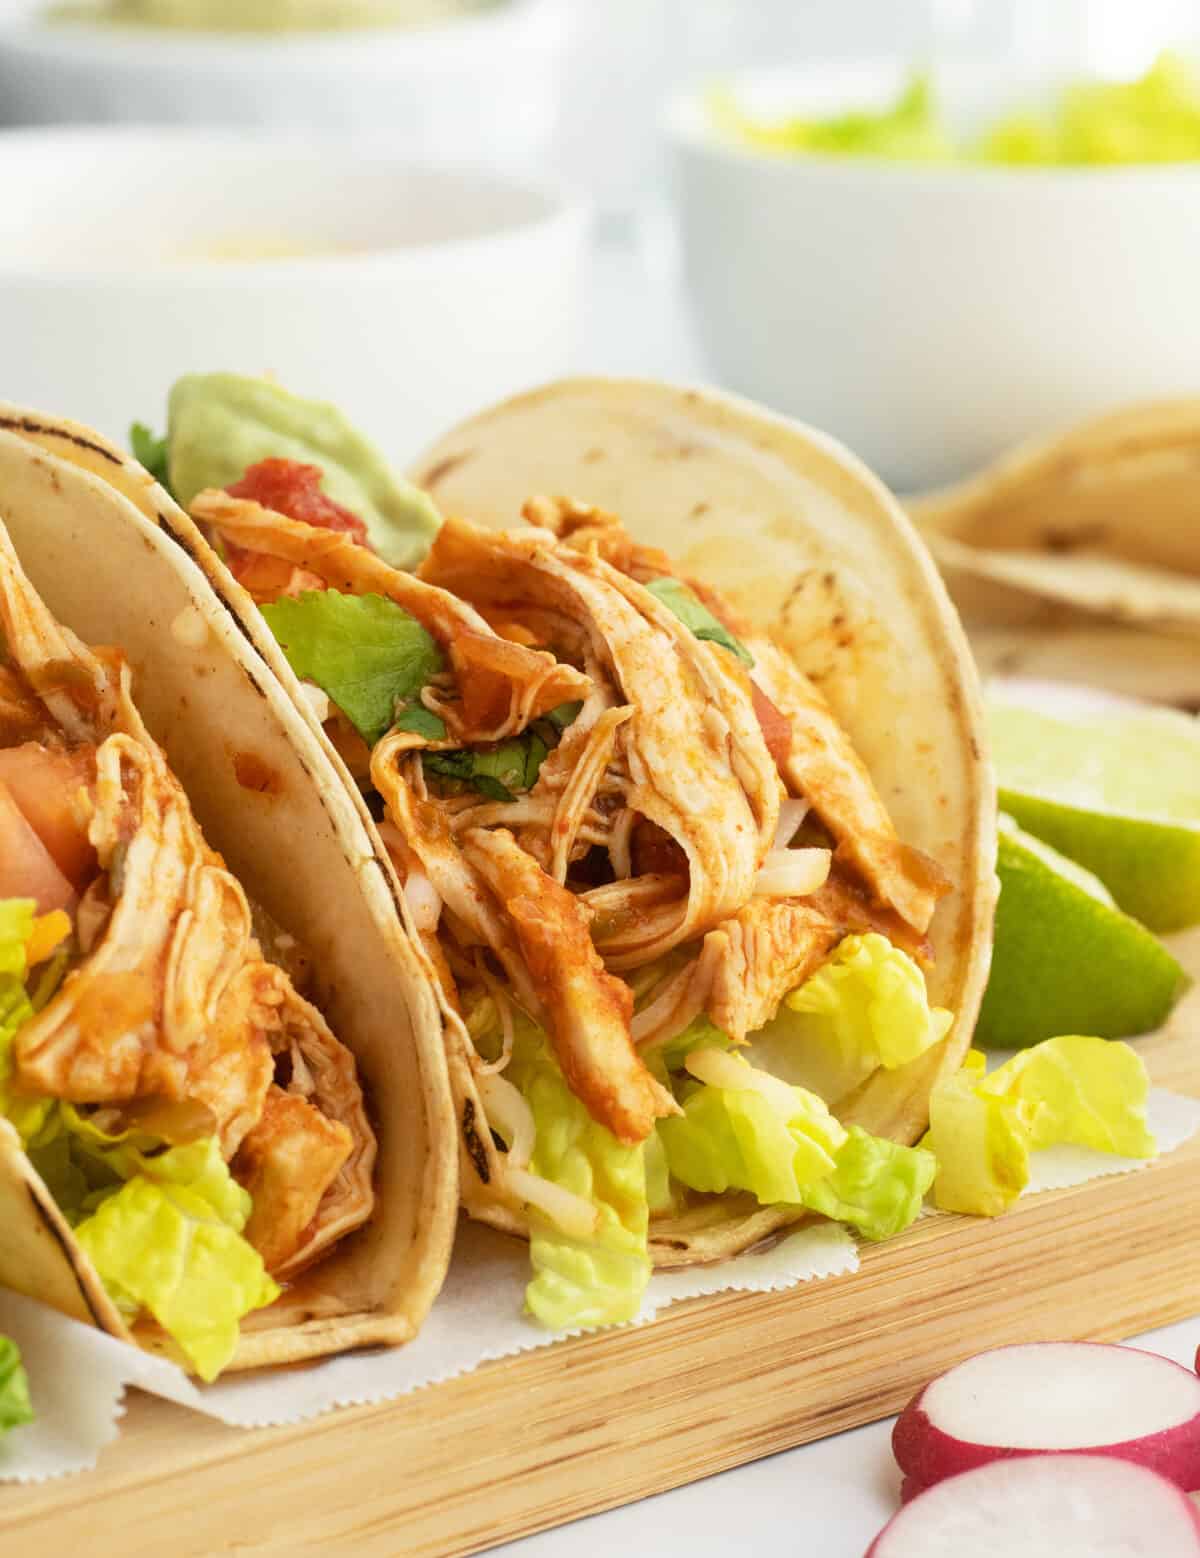 Shredded Chicken Tacos with toppings